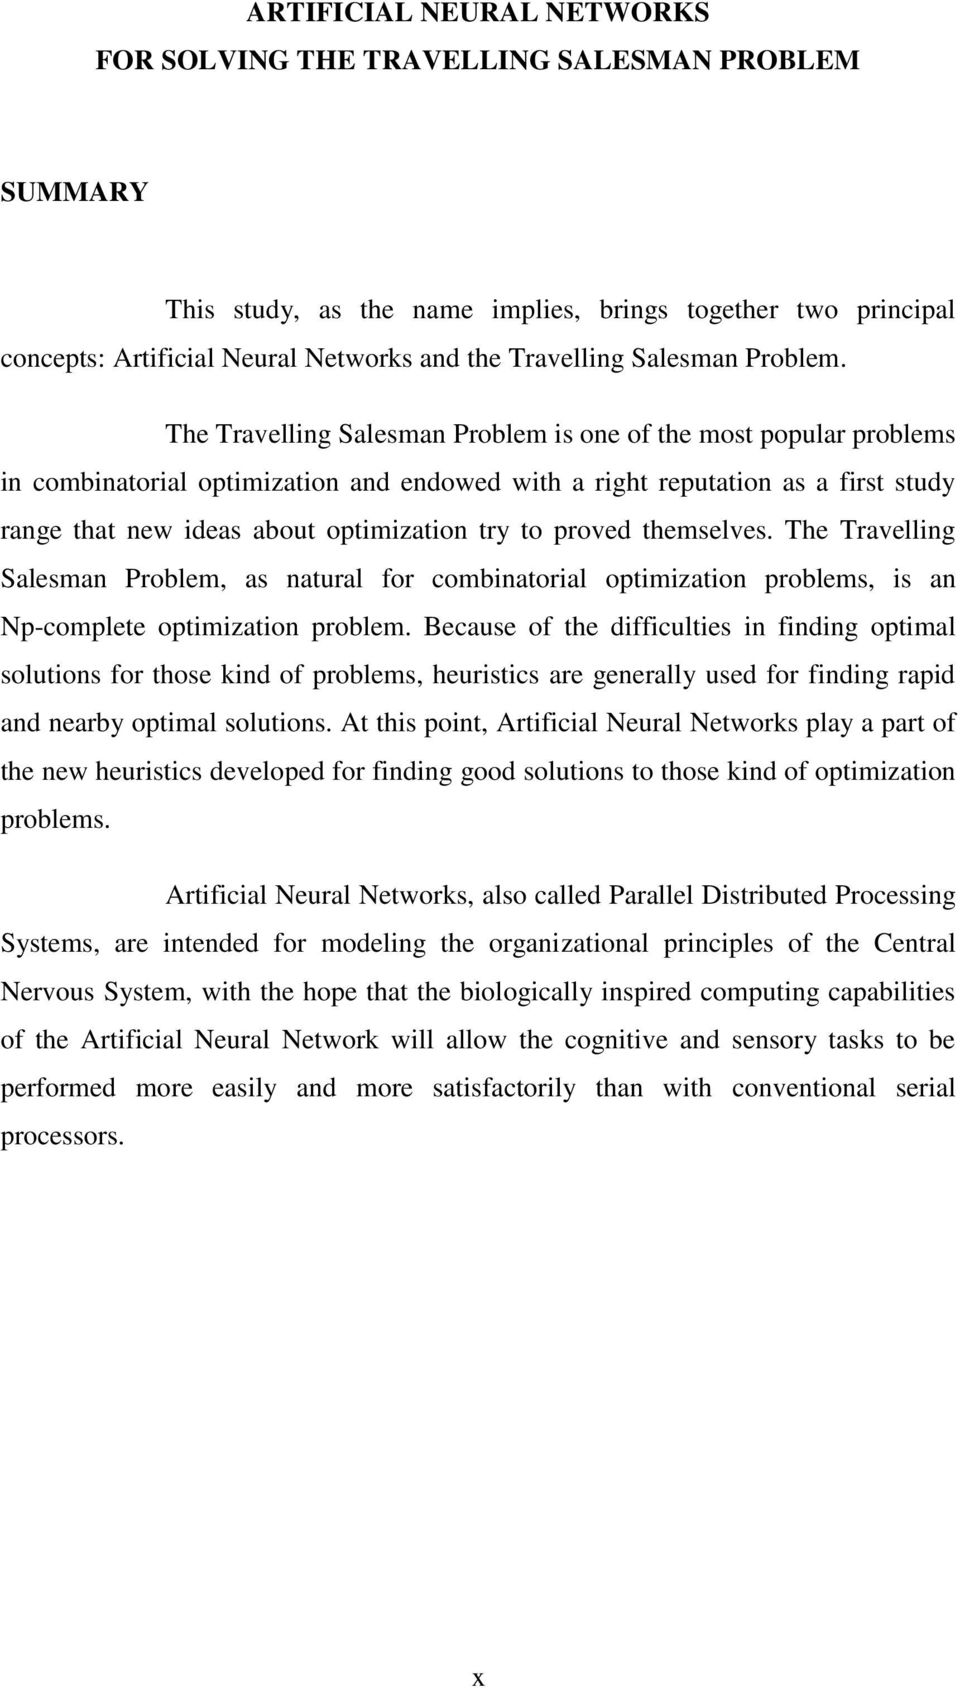 The Travelling Salesman Problem is one of the most popular problems in combinatorial optimization and endowed with a right reputation as a first study range that new ideas about optimization try to